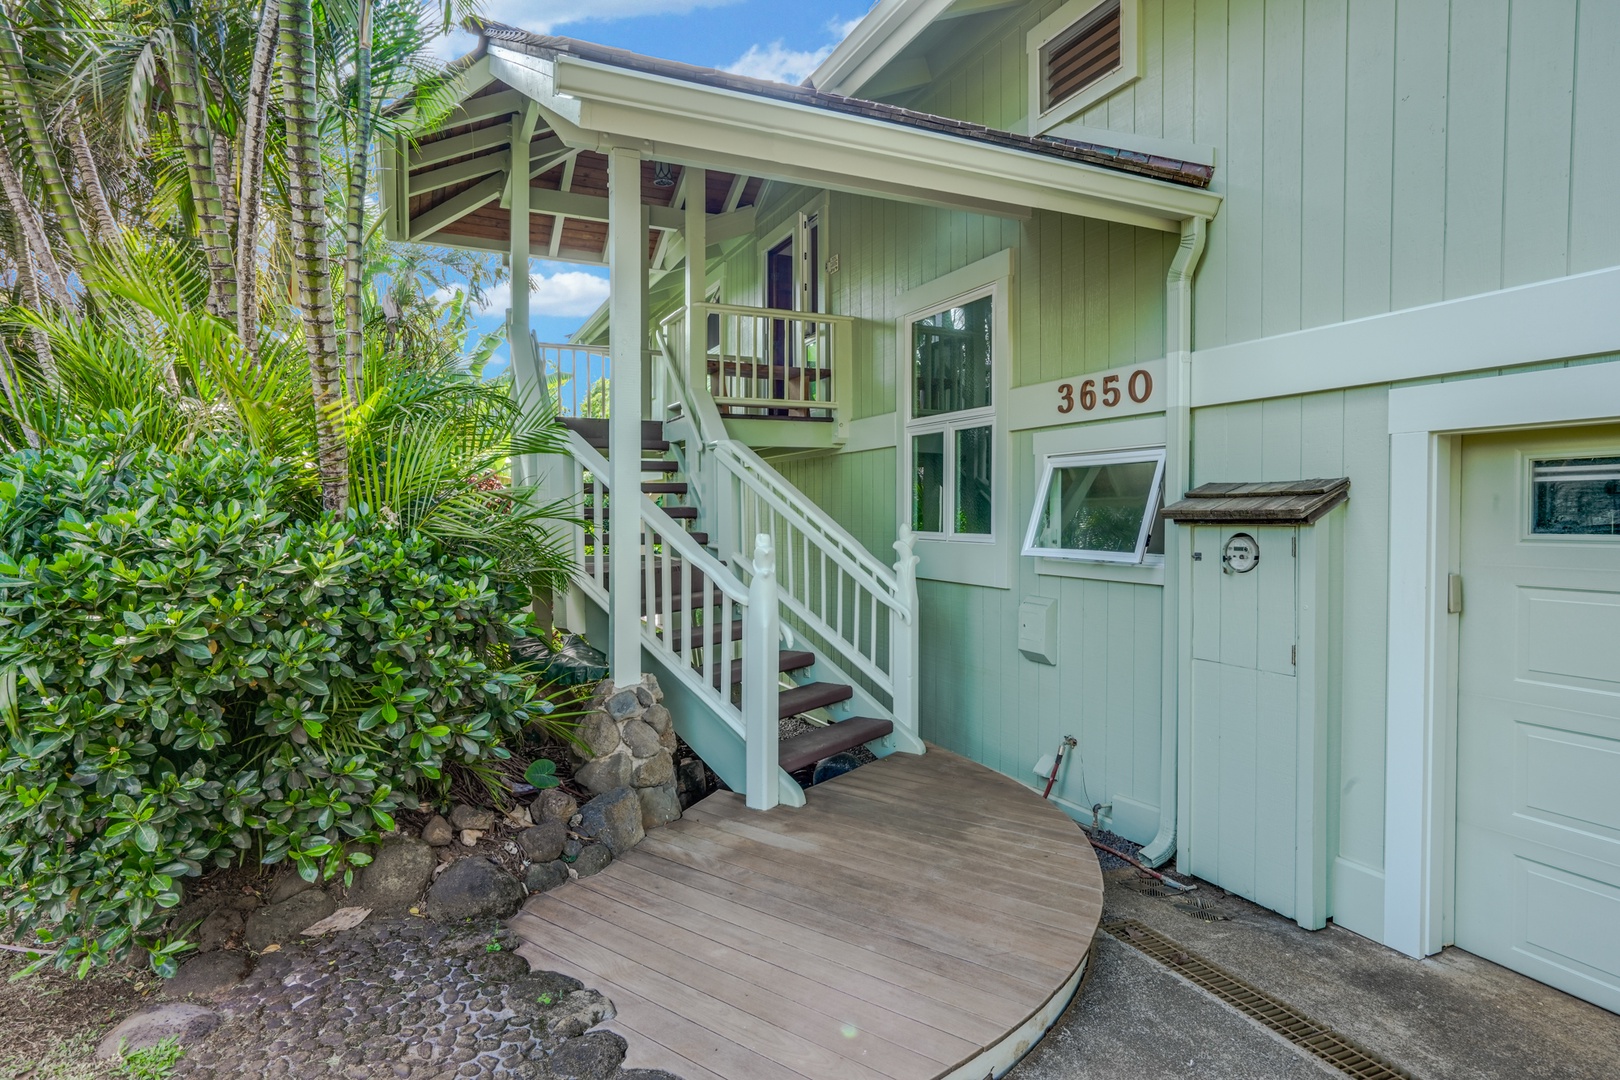 Princeville Vacation Rentals, Wai Lani - Welcome home!